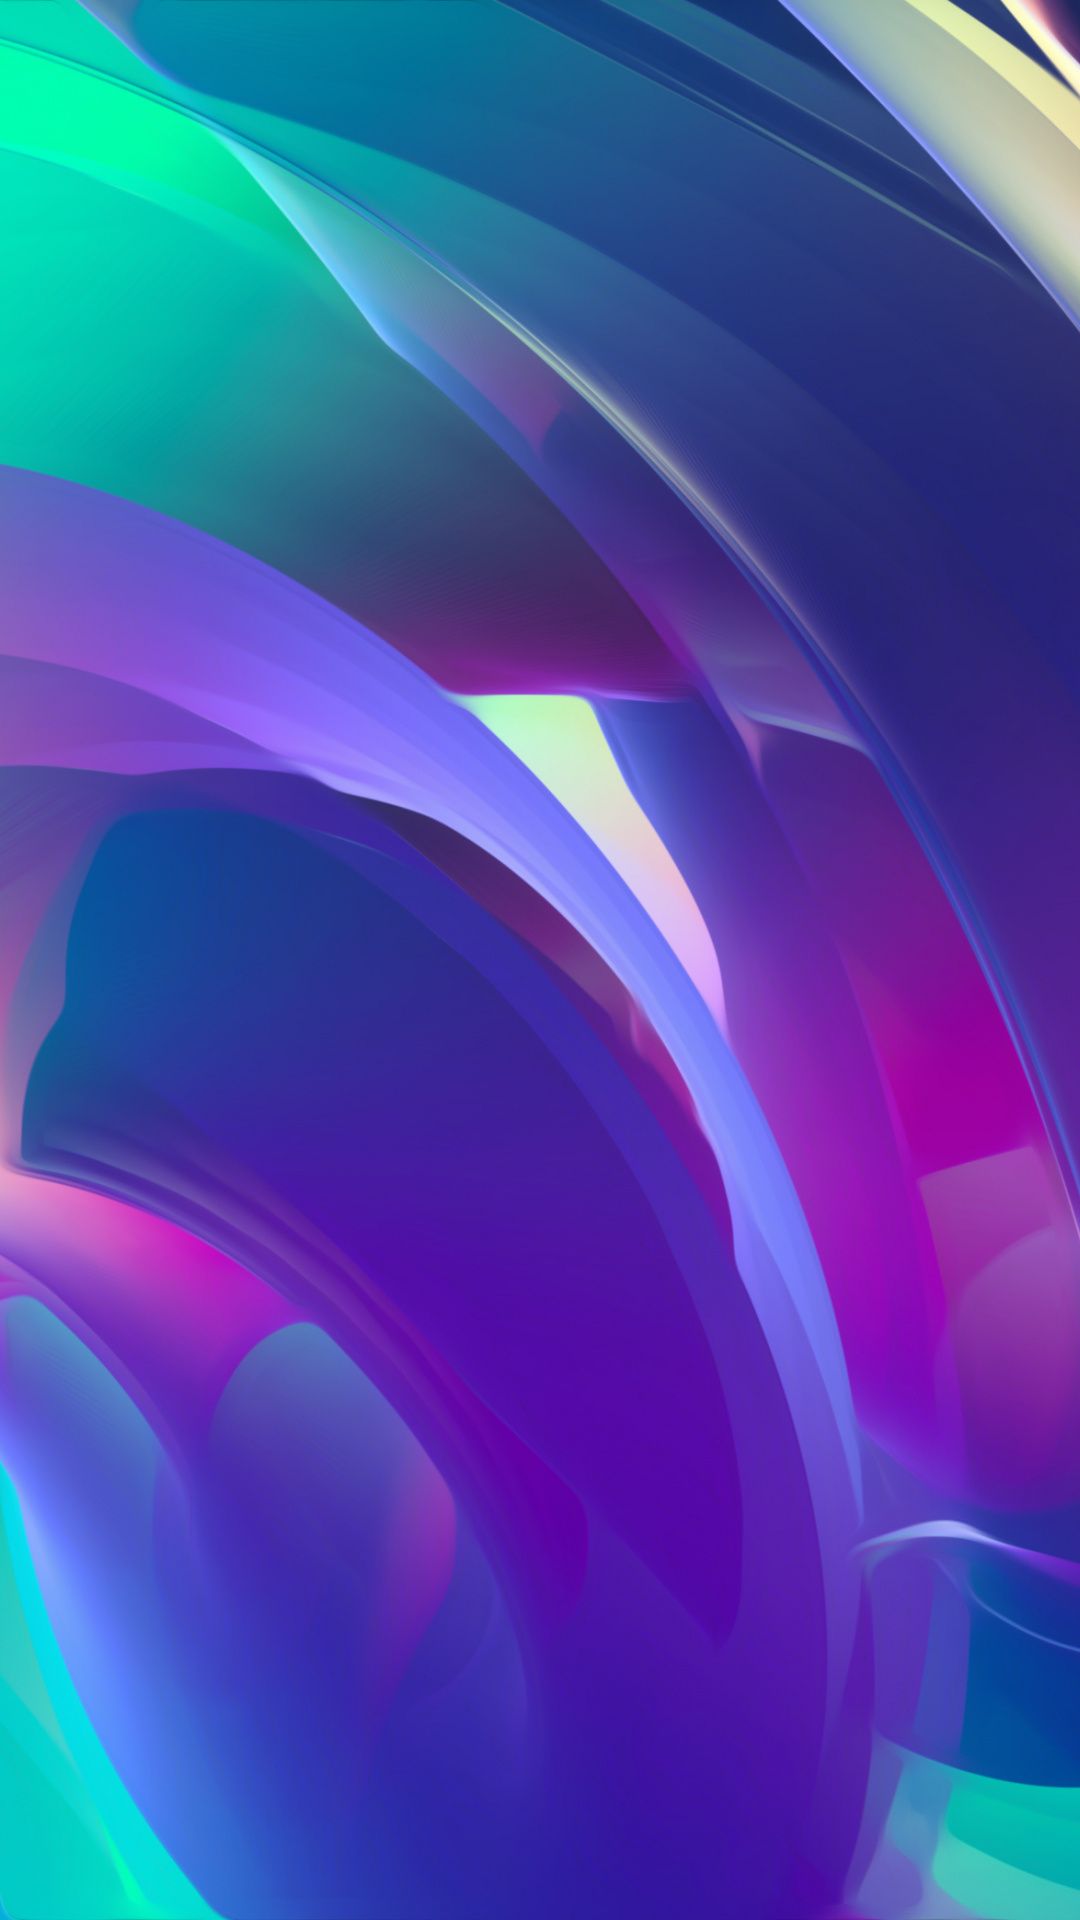 Curves, colorful and vivid, abstract, 1080x1920 wallpaper. Mkbhd wallpaper, Xiaomi wallpaper, Abstract